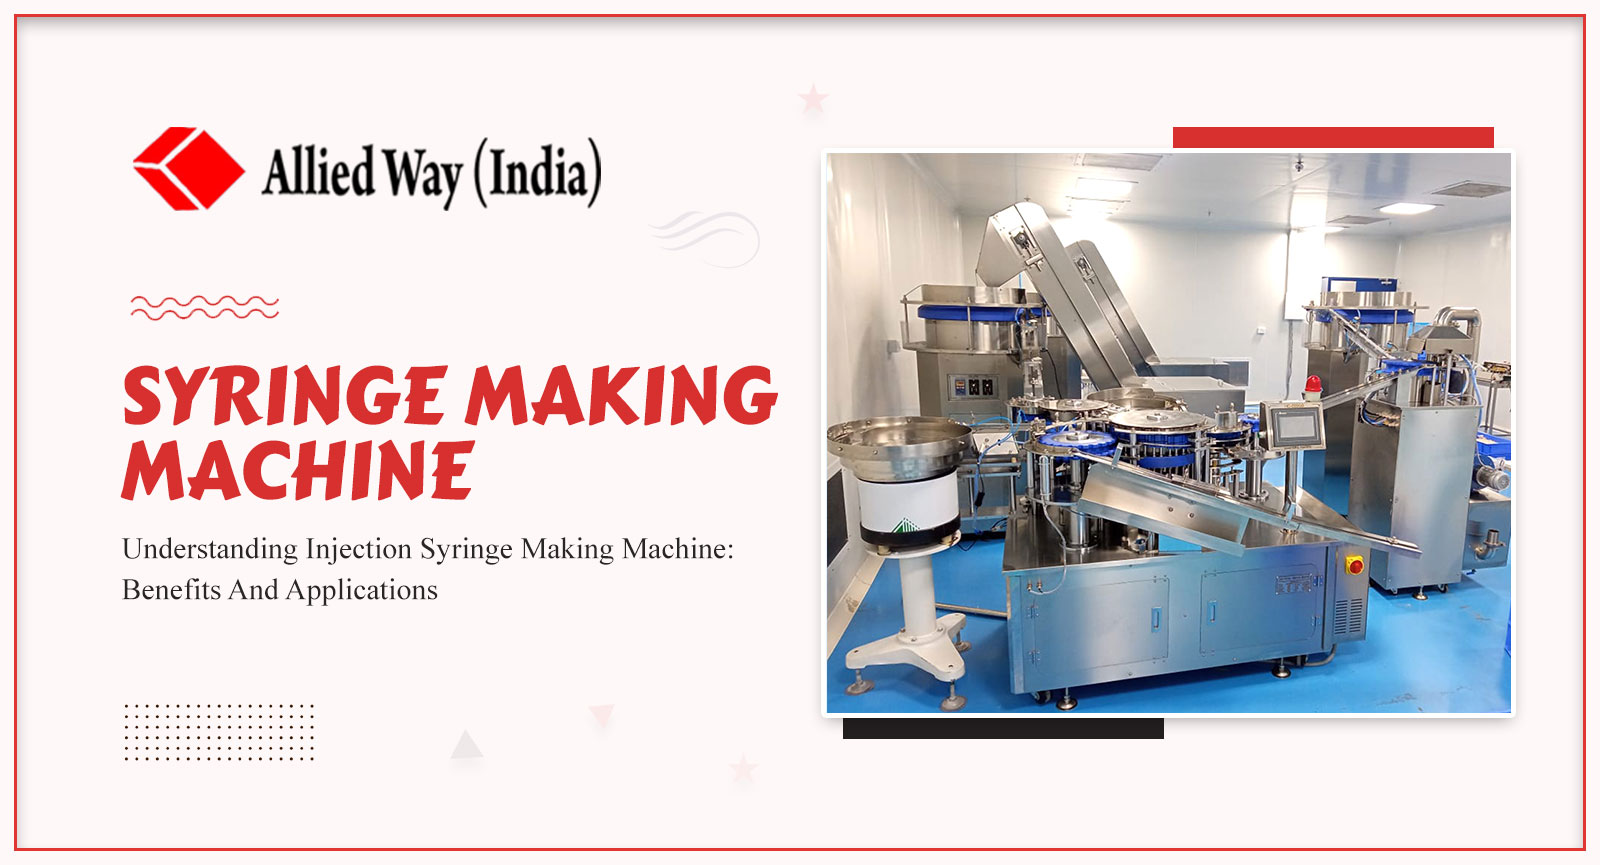 Understanding Injection Syringe Making Machine: Benefits And Applications, Allied Way (India)